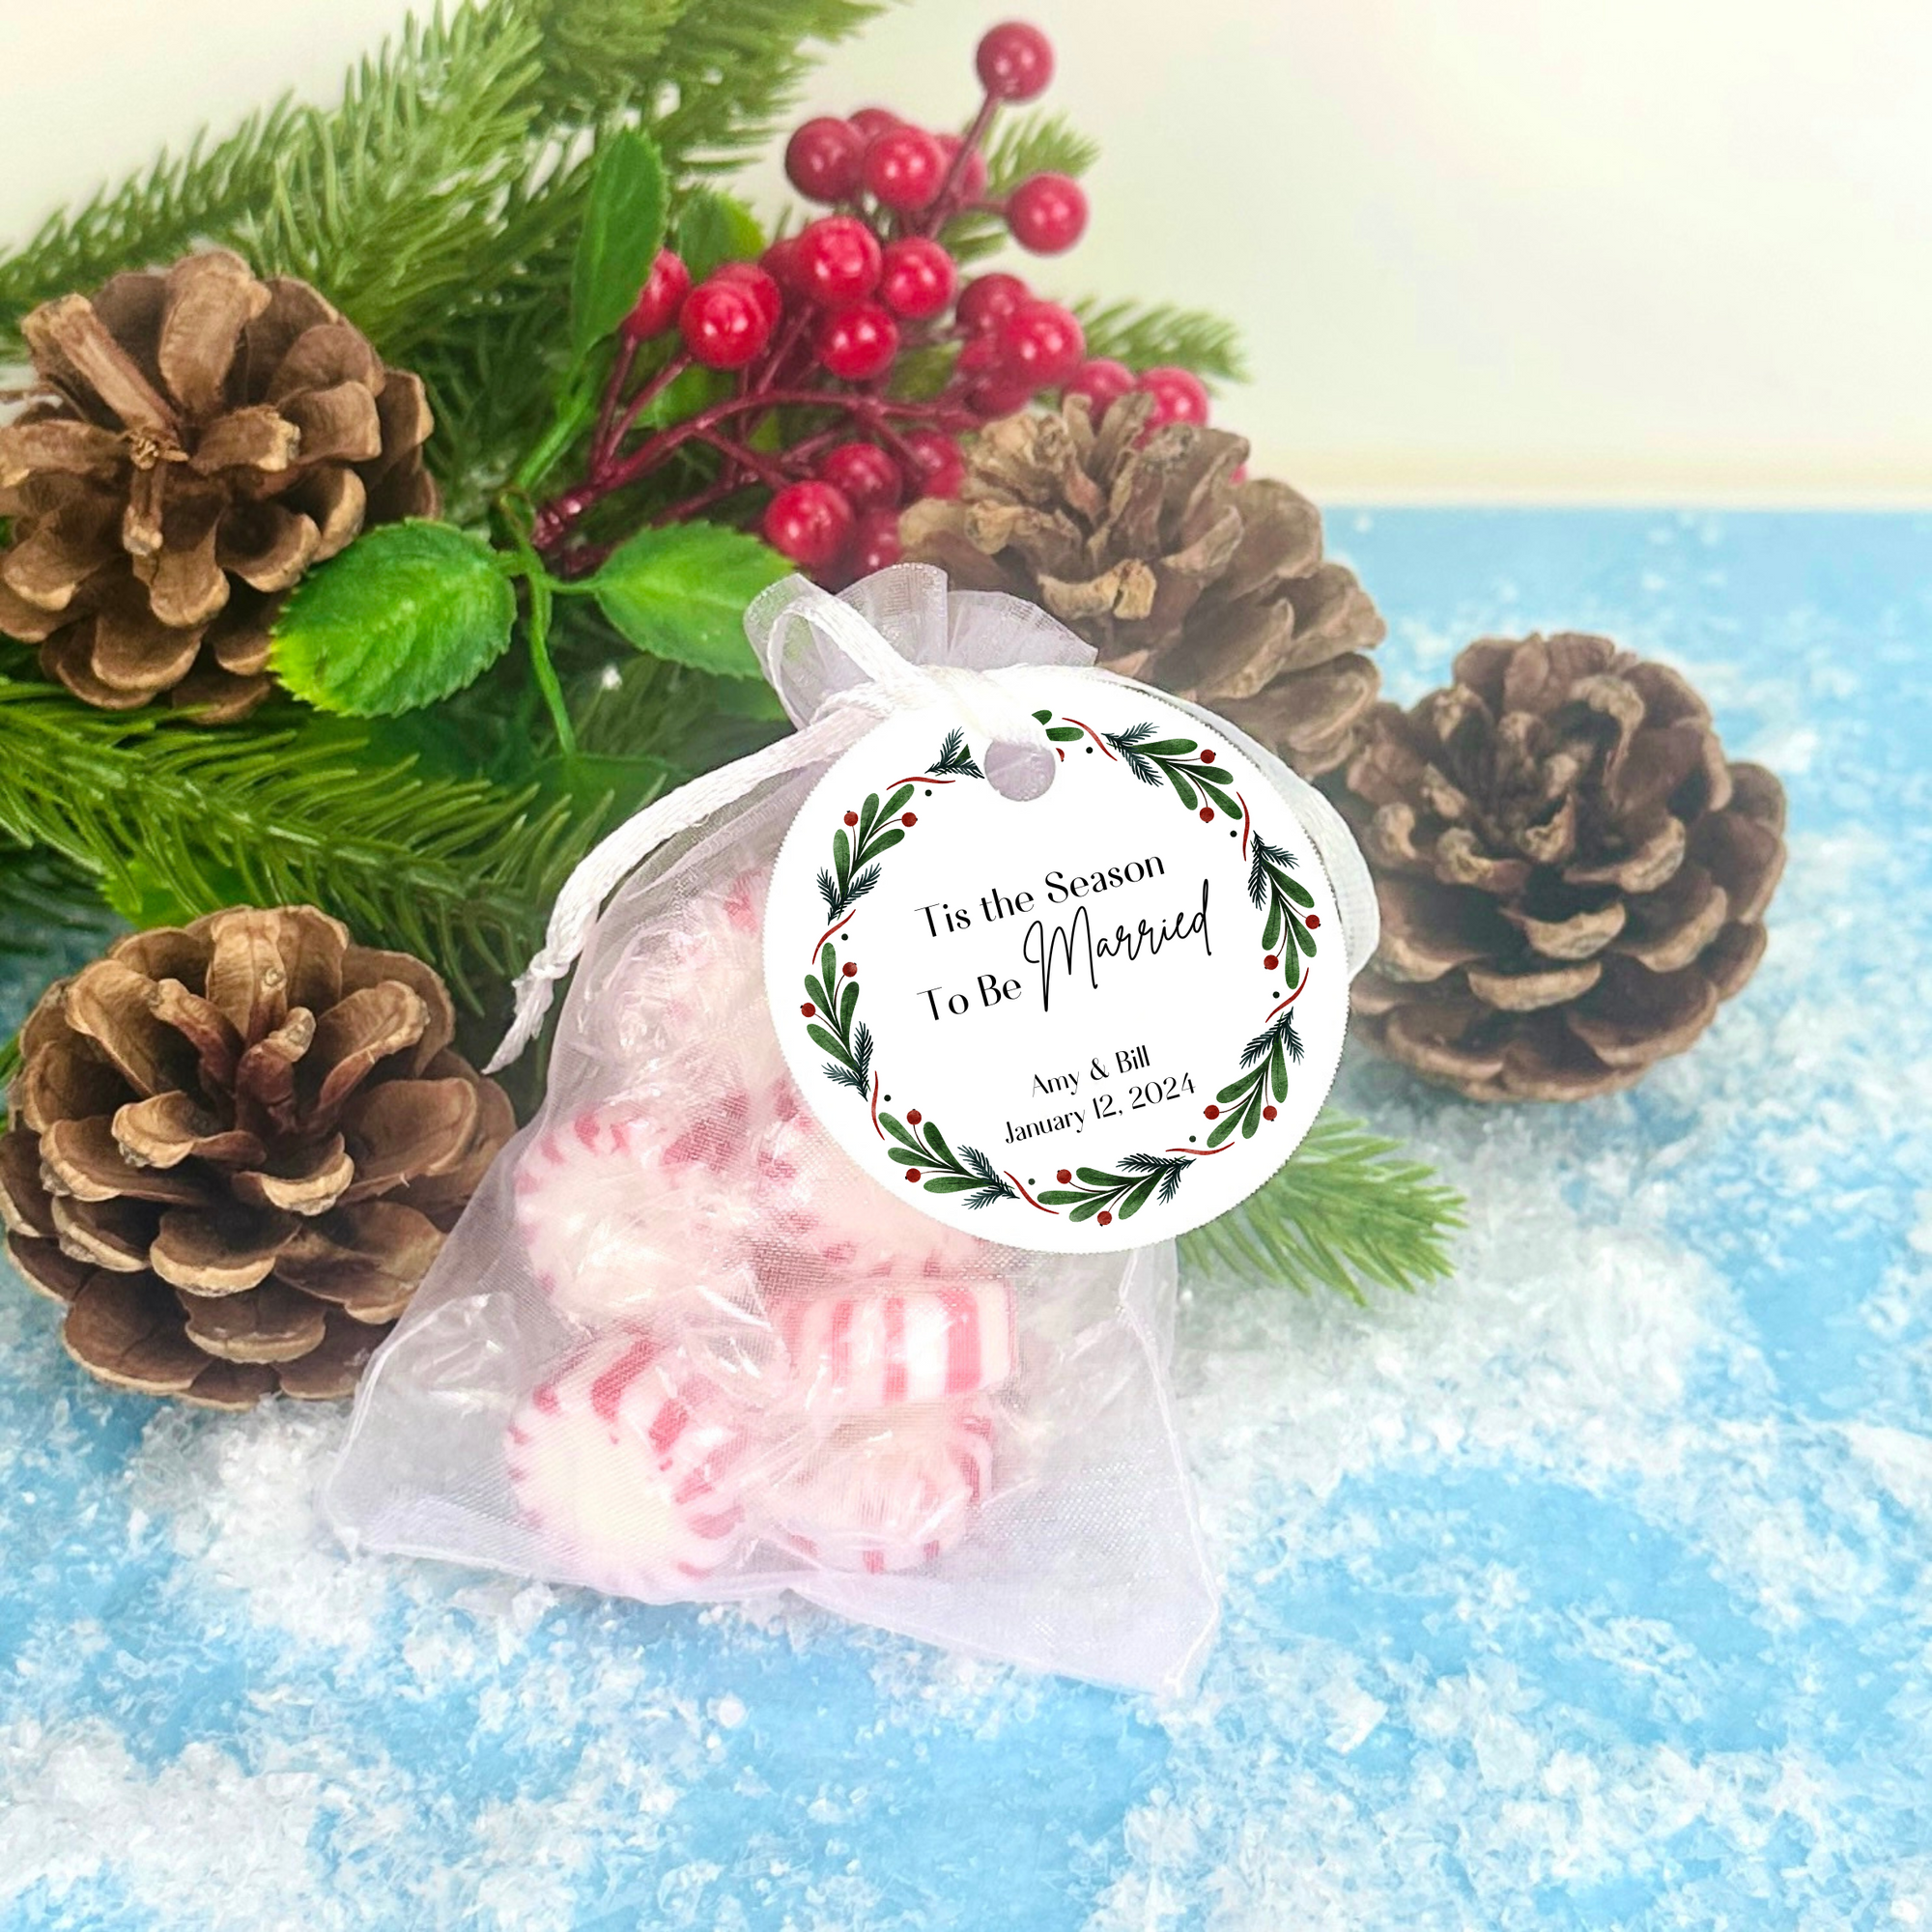 17 Creative Christmas Party Favors for Your Holiday Bash - Forever Wedding  Favors